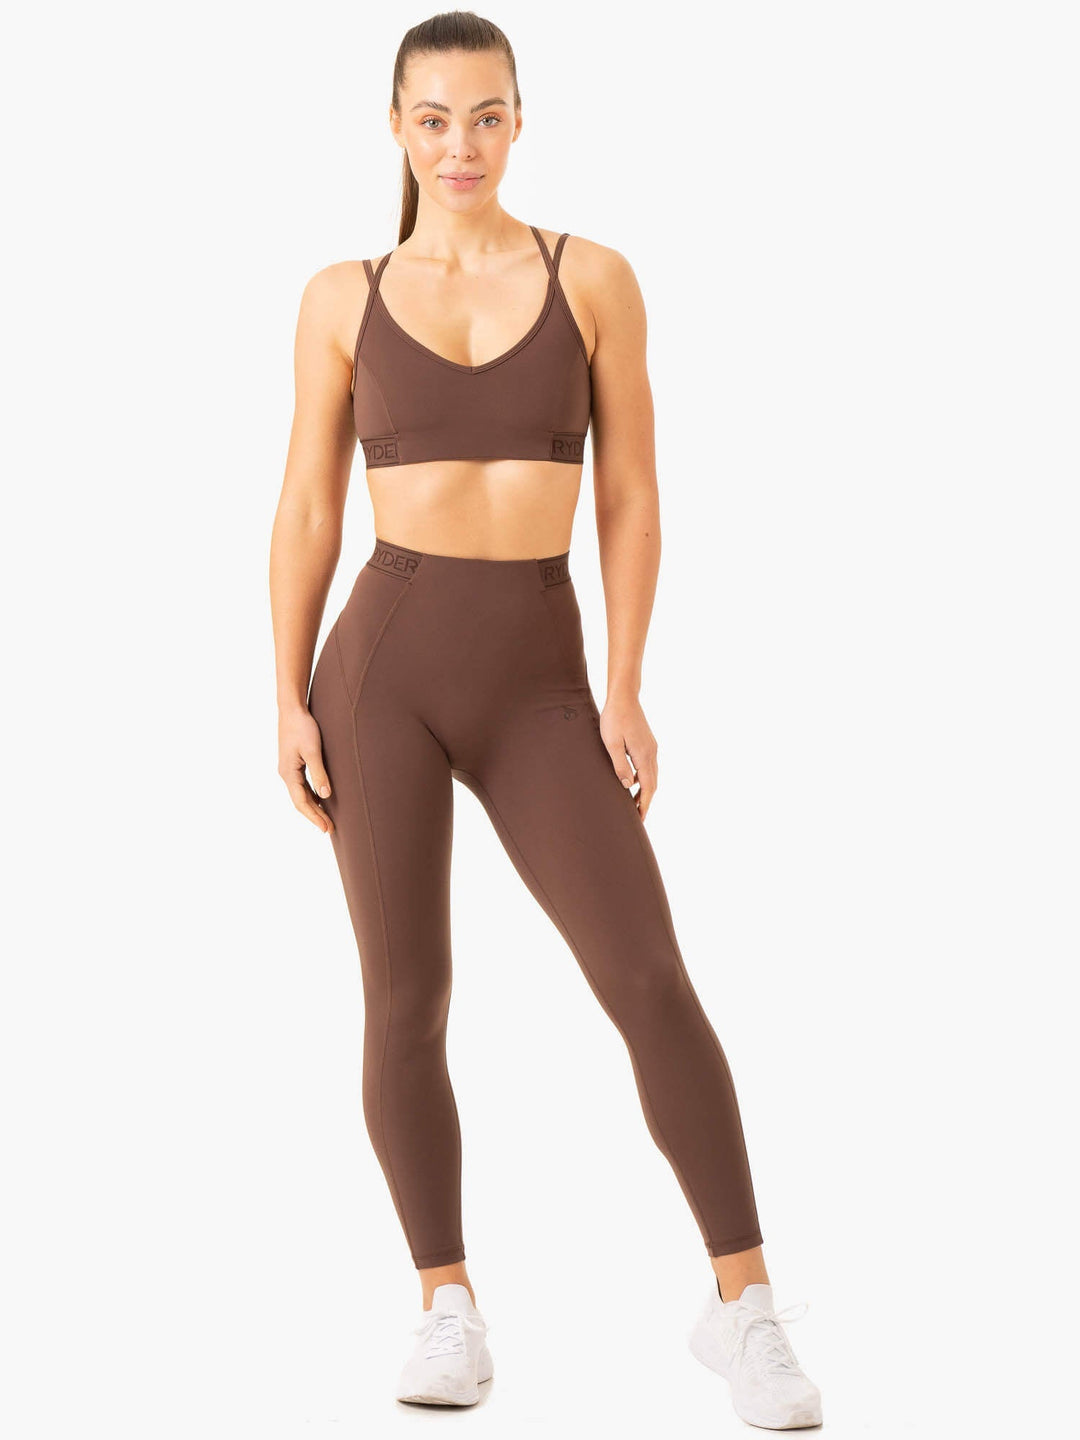 Level Up High Waisted Scrunch Leggings - Chocolate Clothing Ryderwear 